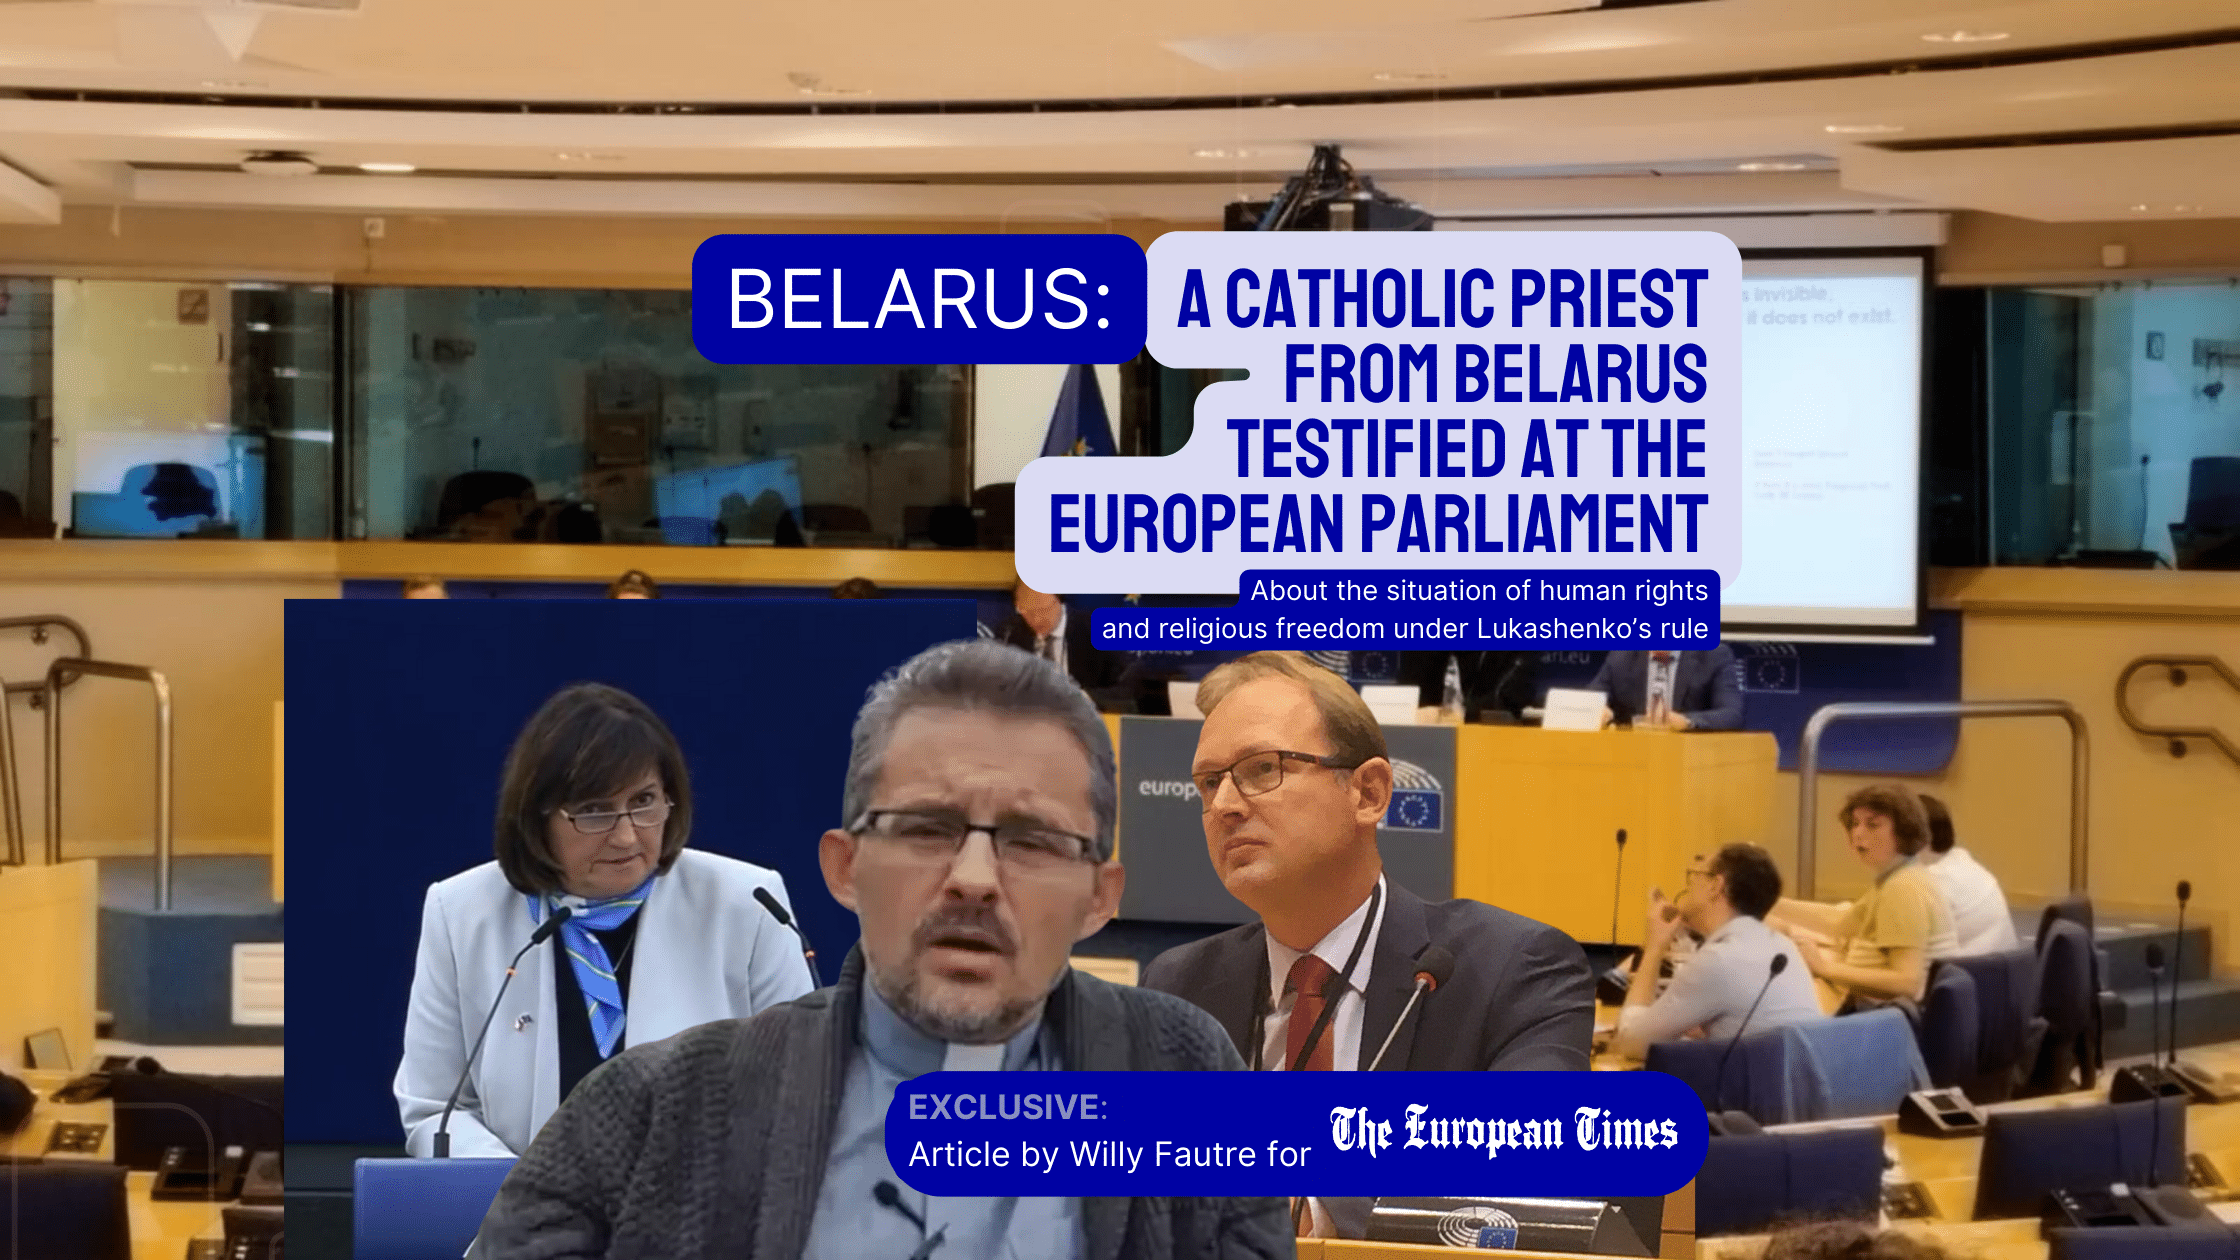 A Catholic priest from Belarus testified at the European Parliament